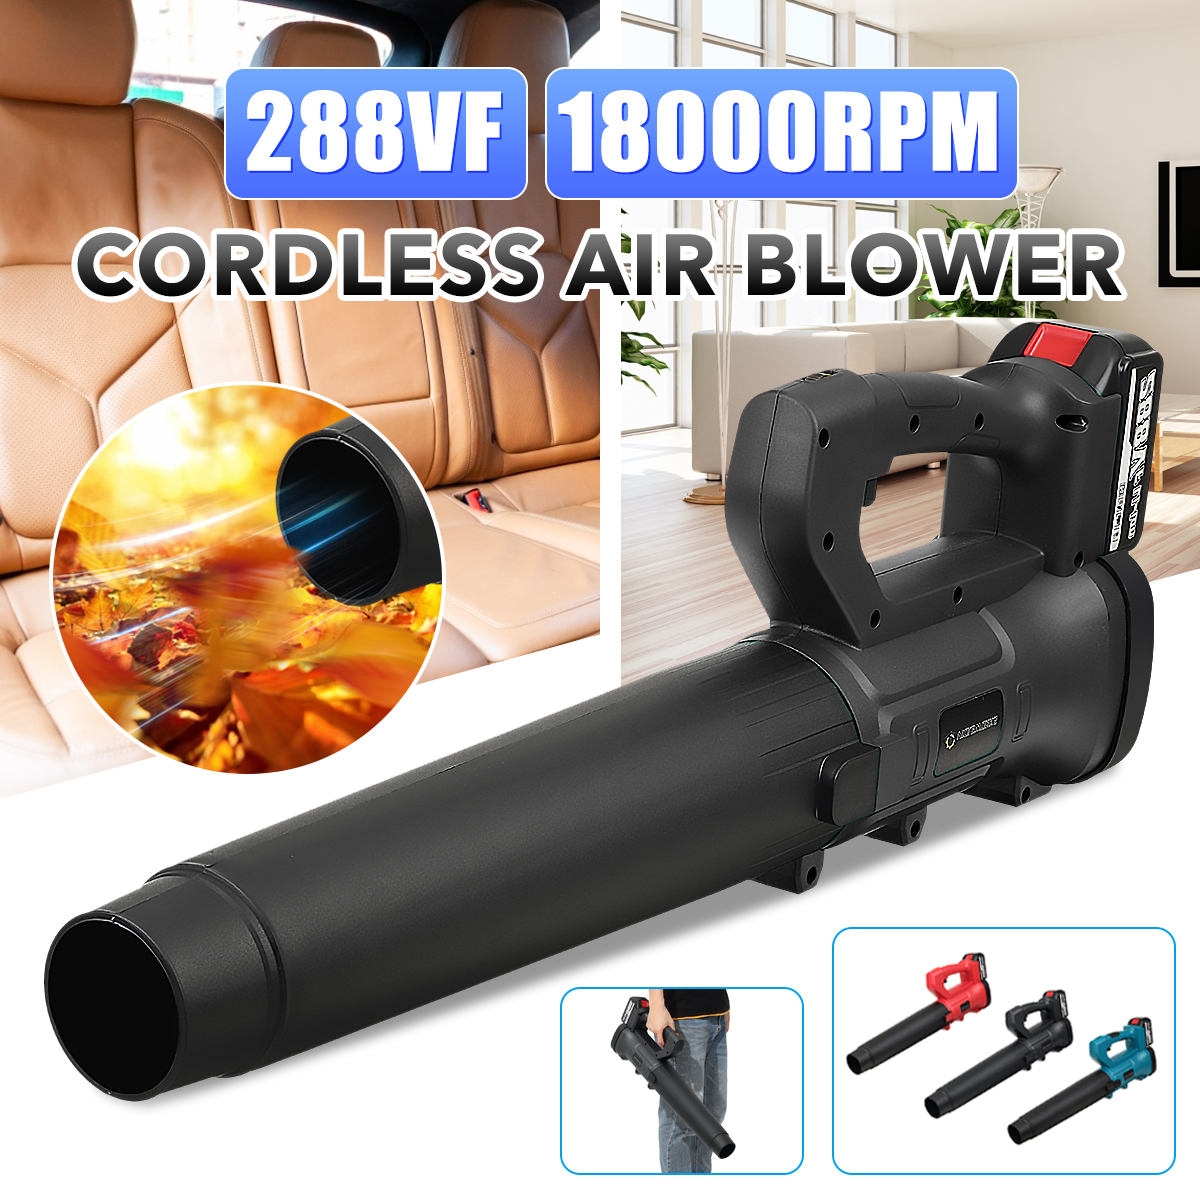 288VF-18000RPM-Cordless-Electric-Air-Blower-Vacuum-Cleannig-Dust-Blowing-Dust-Collector-Leaf-Blower--1849707-2